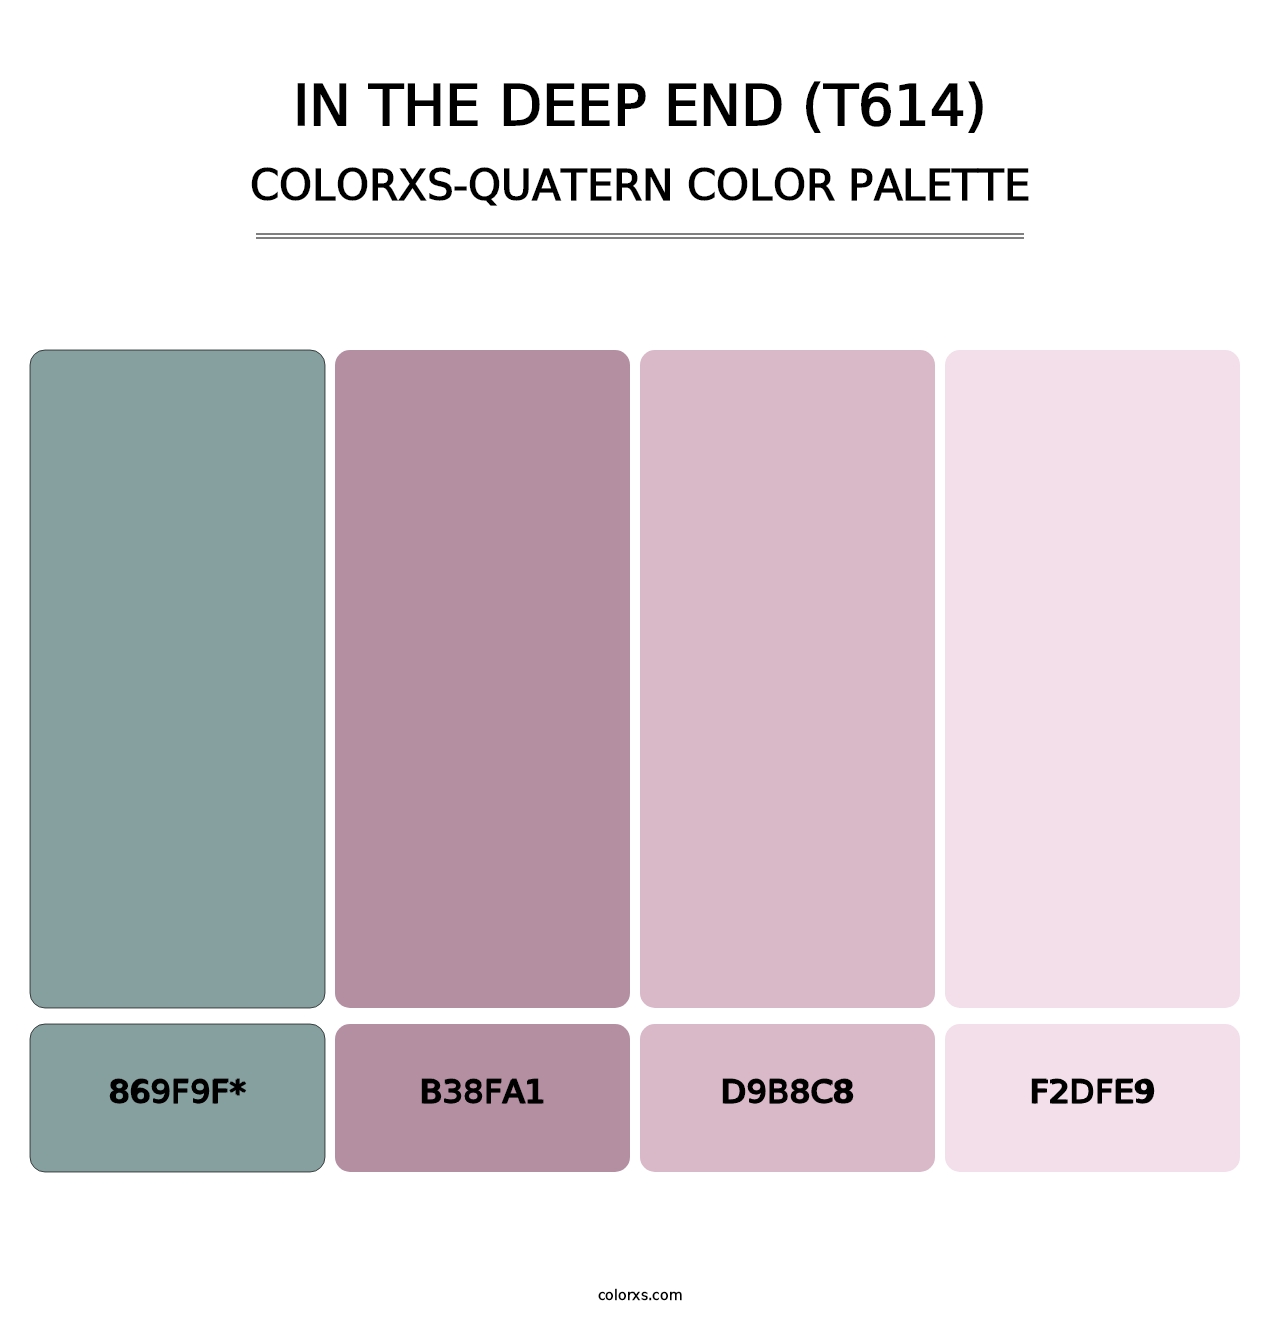 In the Deep End (T614) - Colorxs Quatern Palette